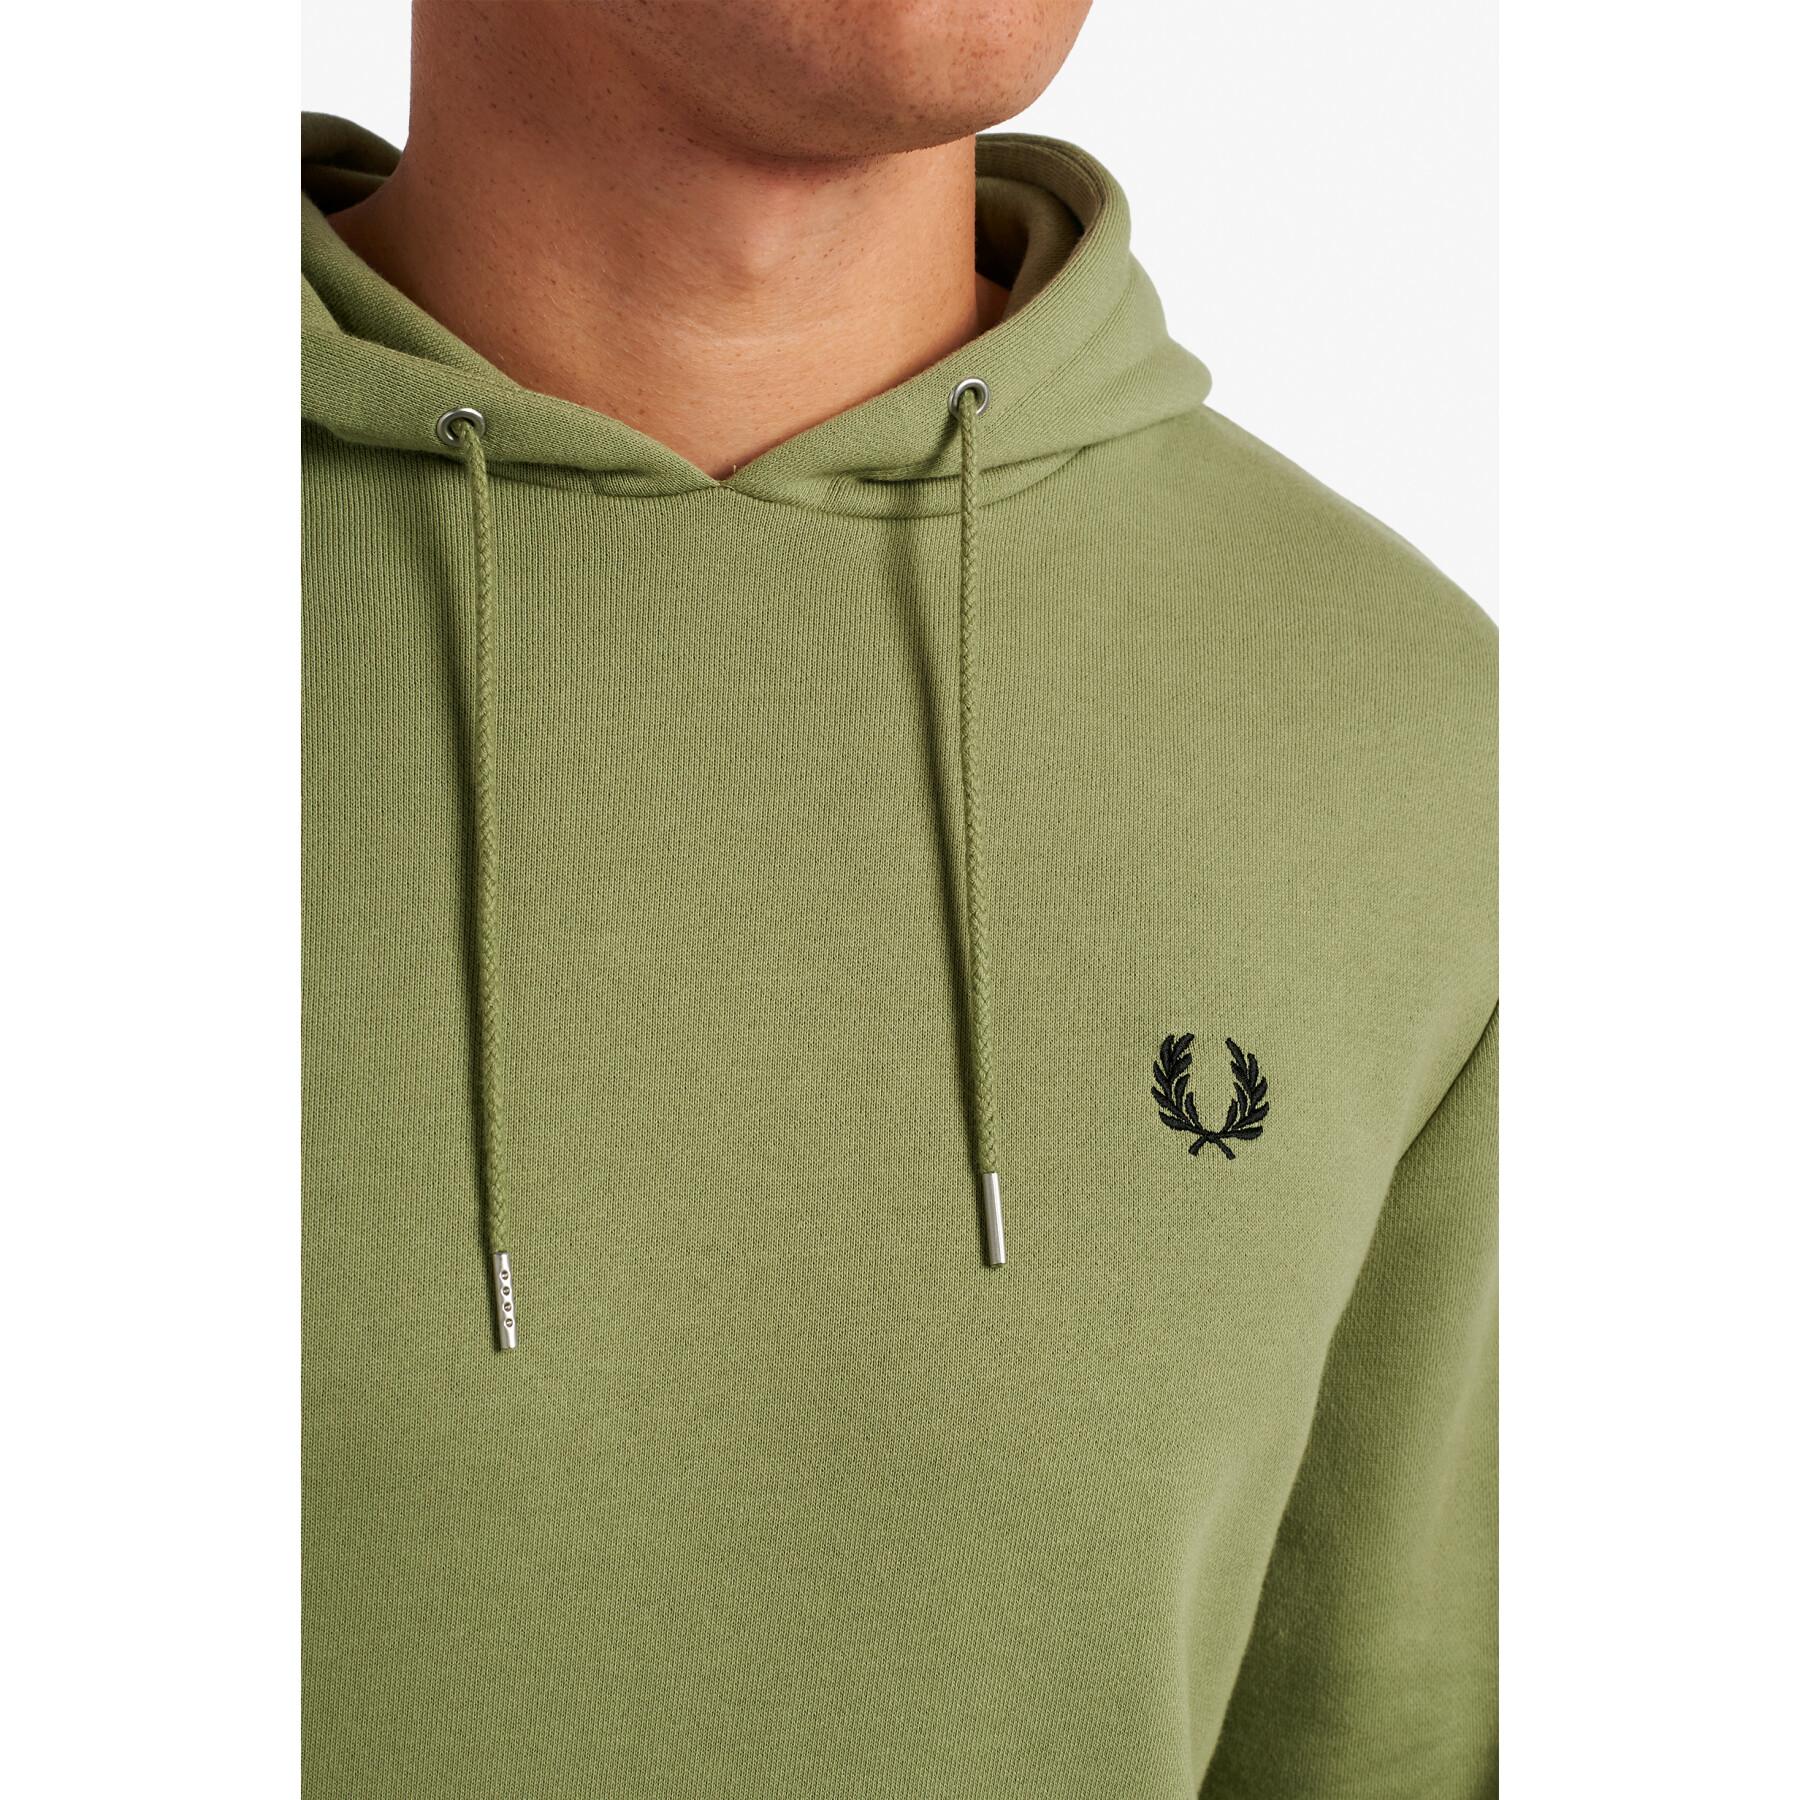 Sudadera con capucha Fred Perry Tipped